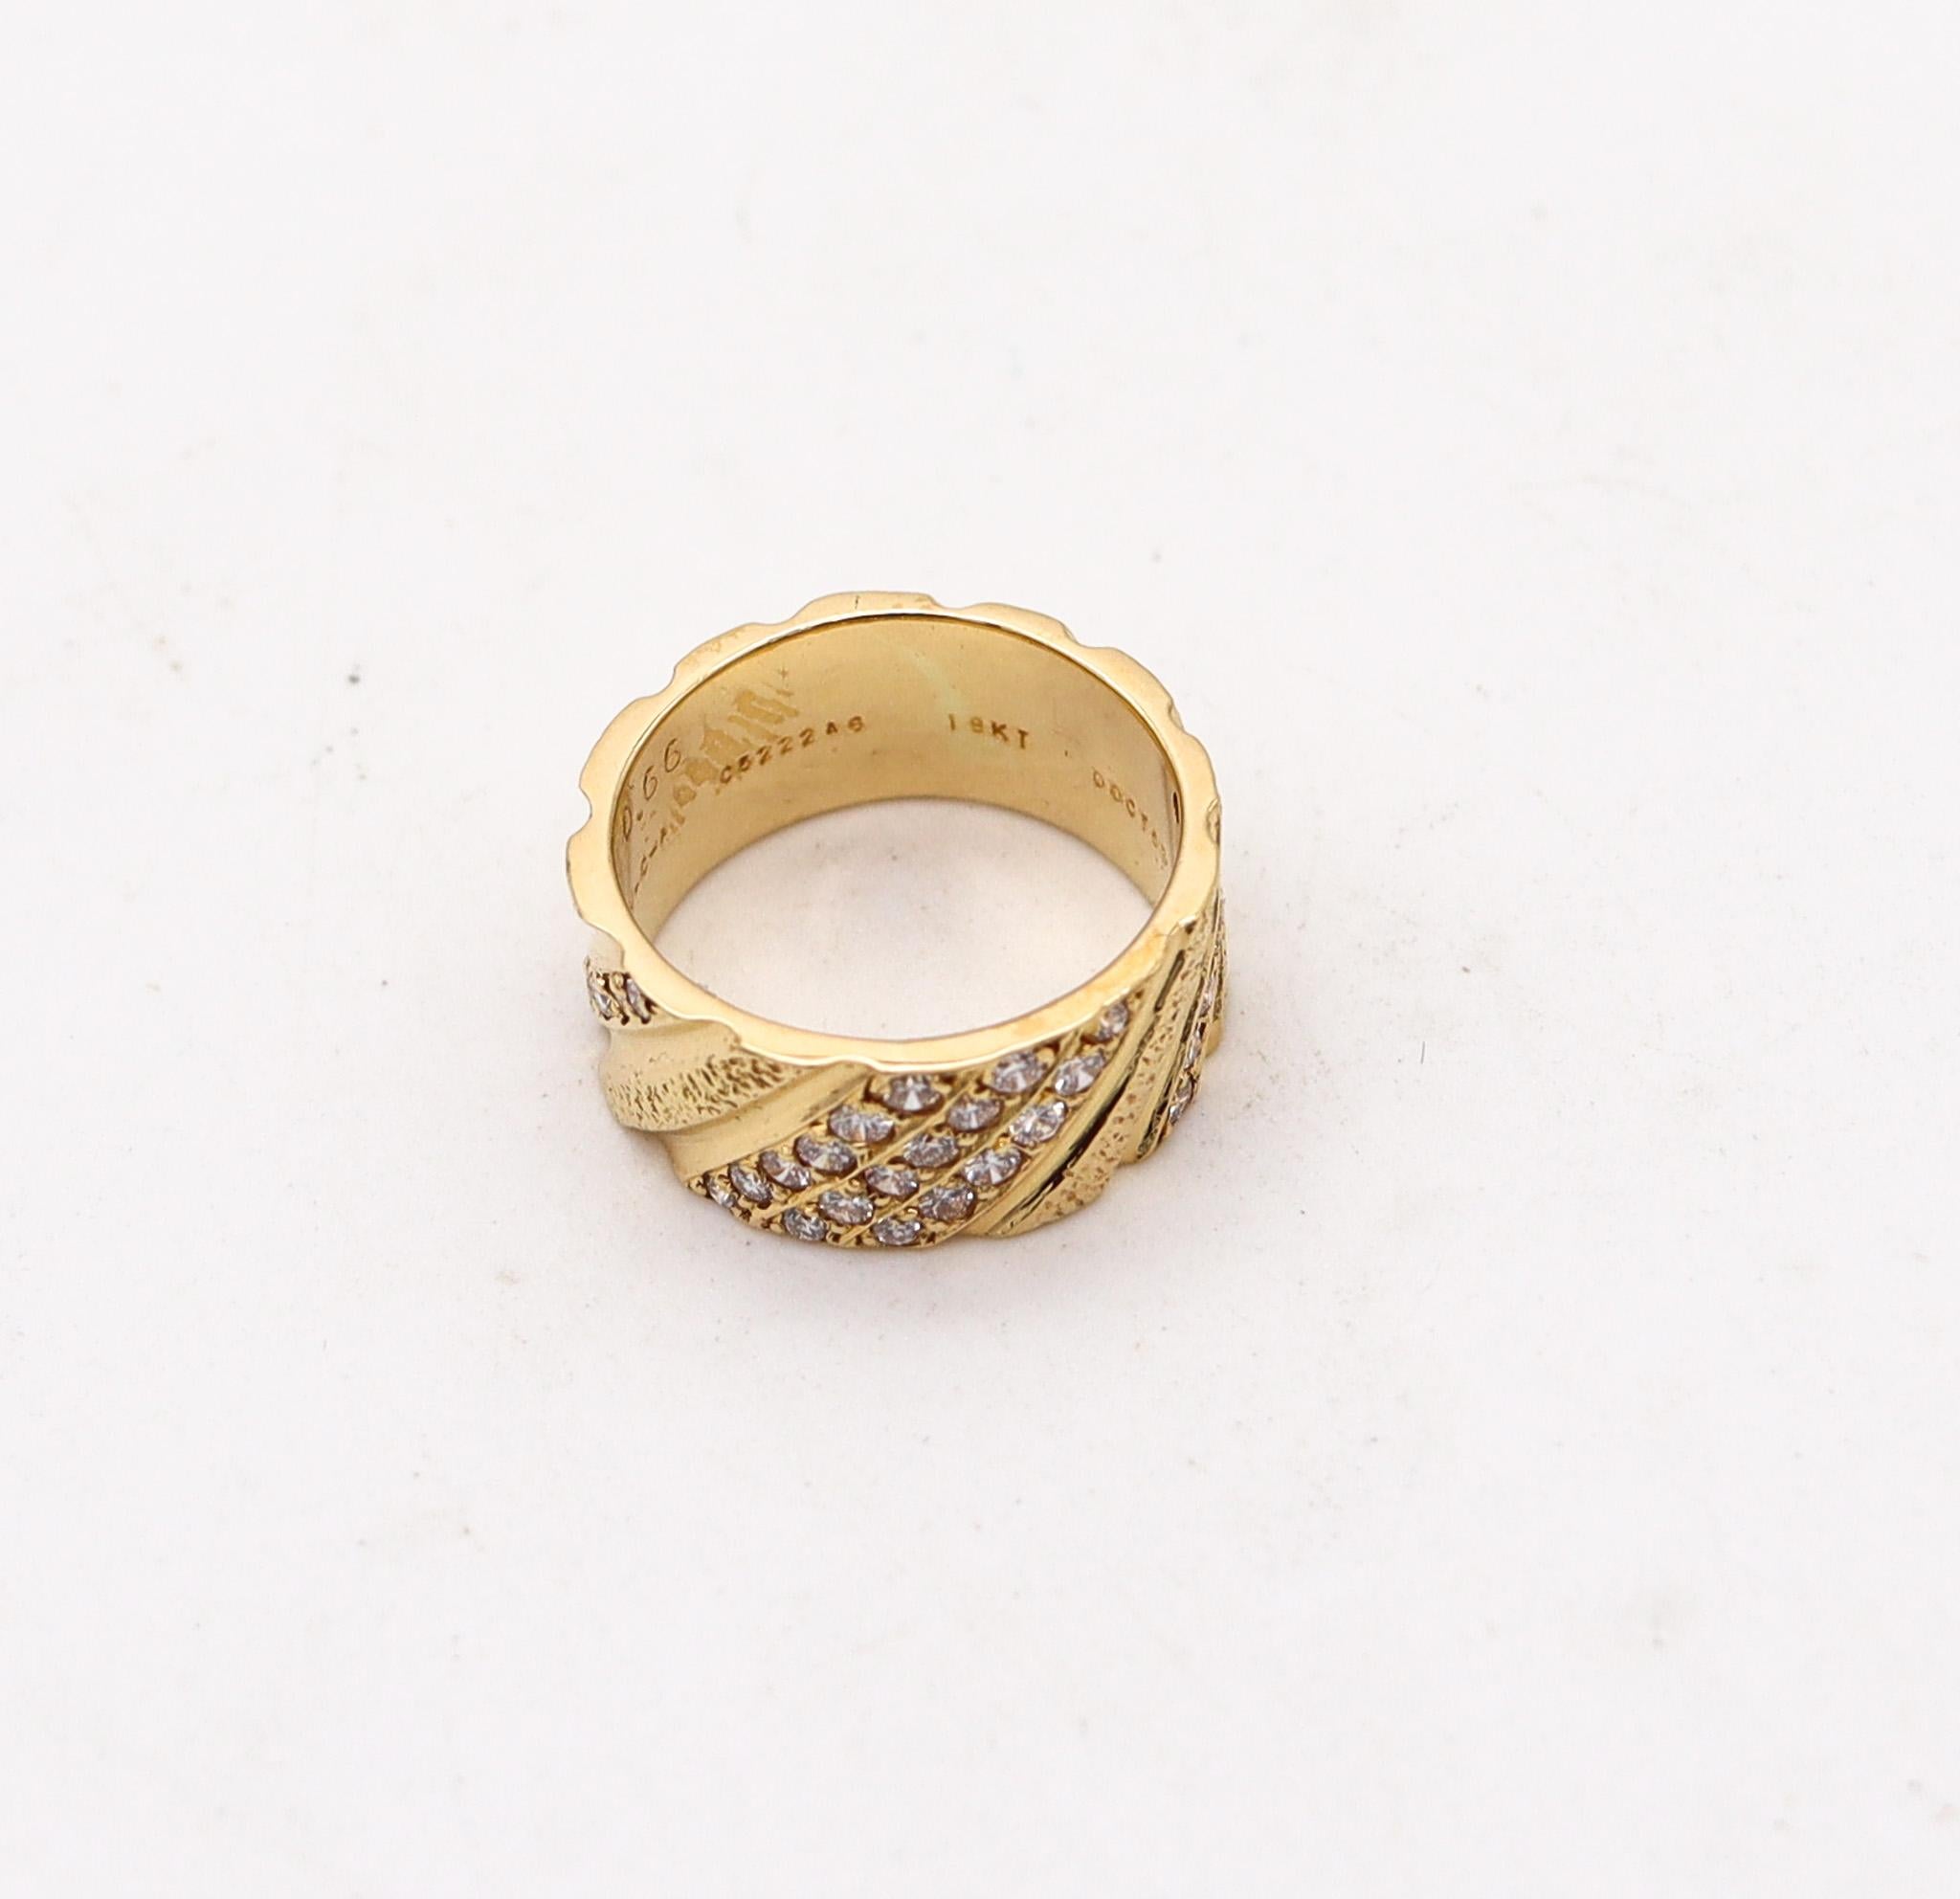 Ring band designed by Van Cleef & Arpels.

Beautiful contemporary ring, created in Paris France by the jewelry house of Van Cleef & Arpels. This beautiful ring has been carefully crafted in solid yellow gold of 18 karats with high textured and